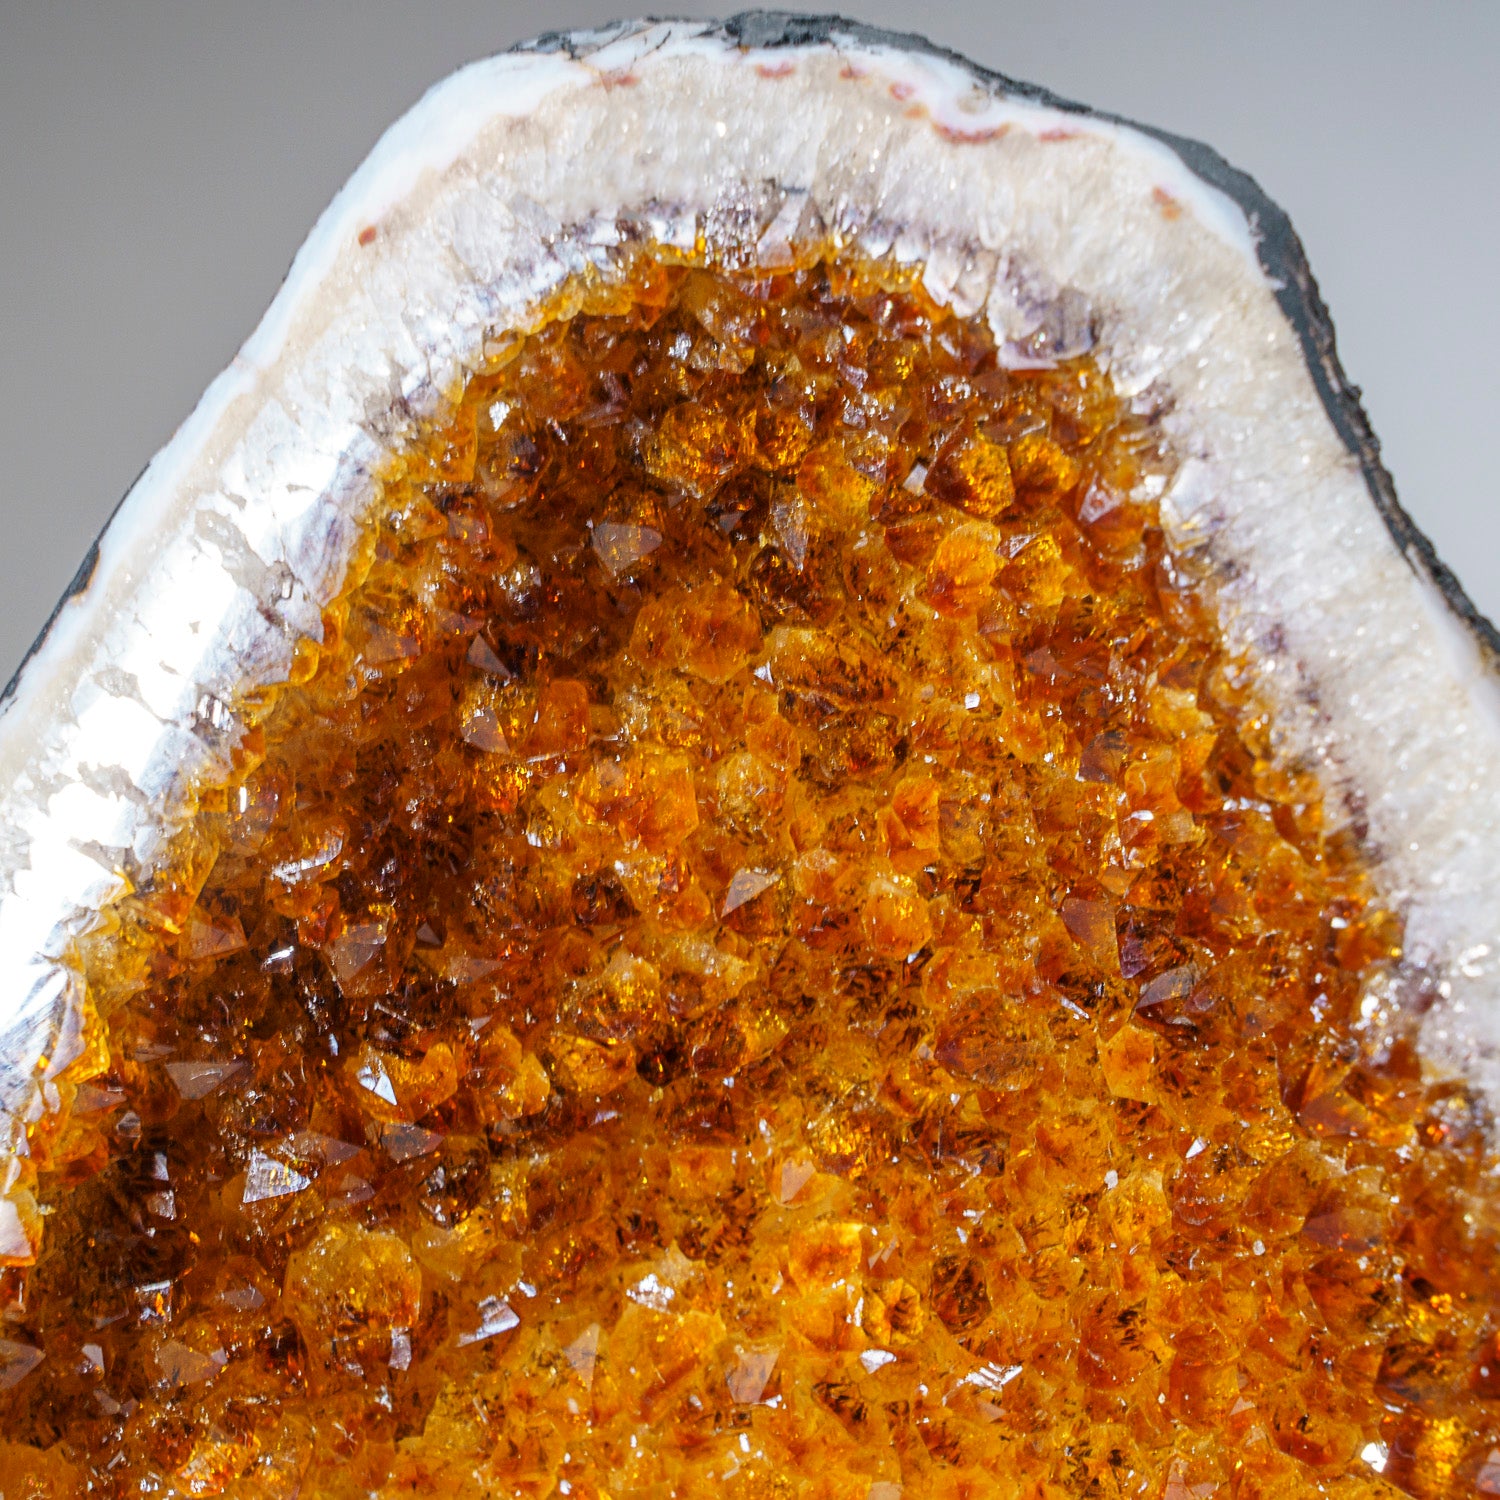 Genuine Citrine Crystal Clustered Geode from Brazil (19.5 lbs)